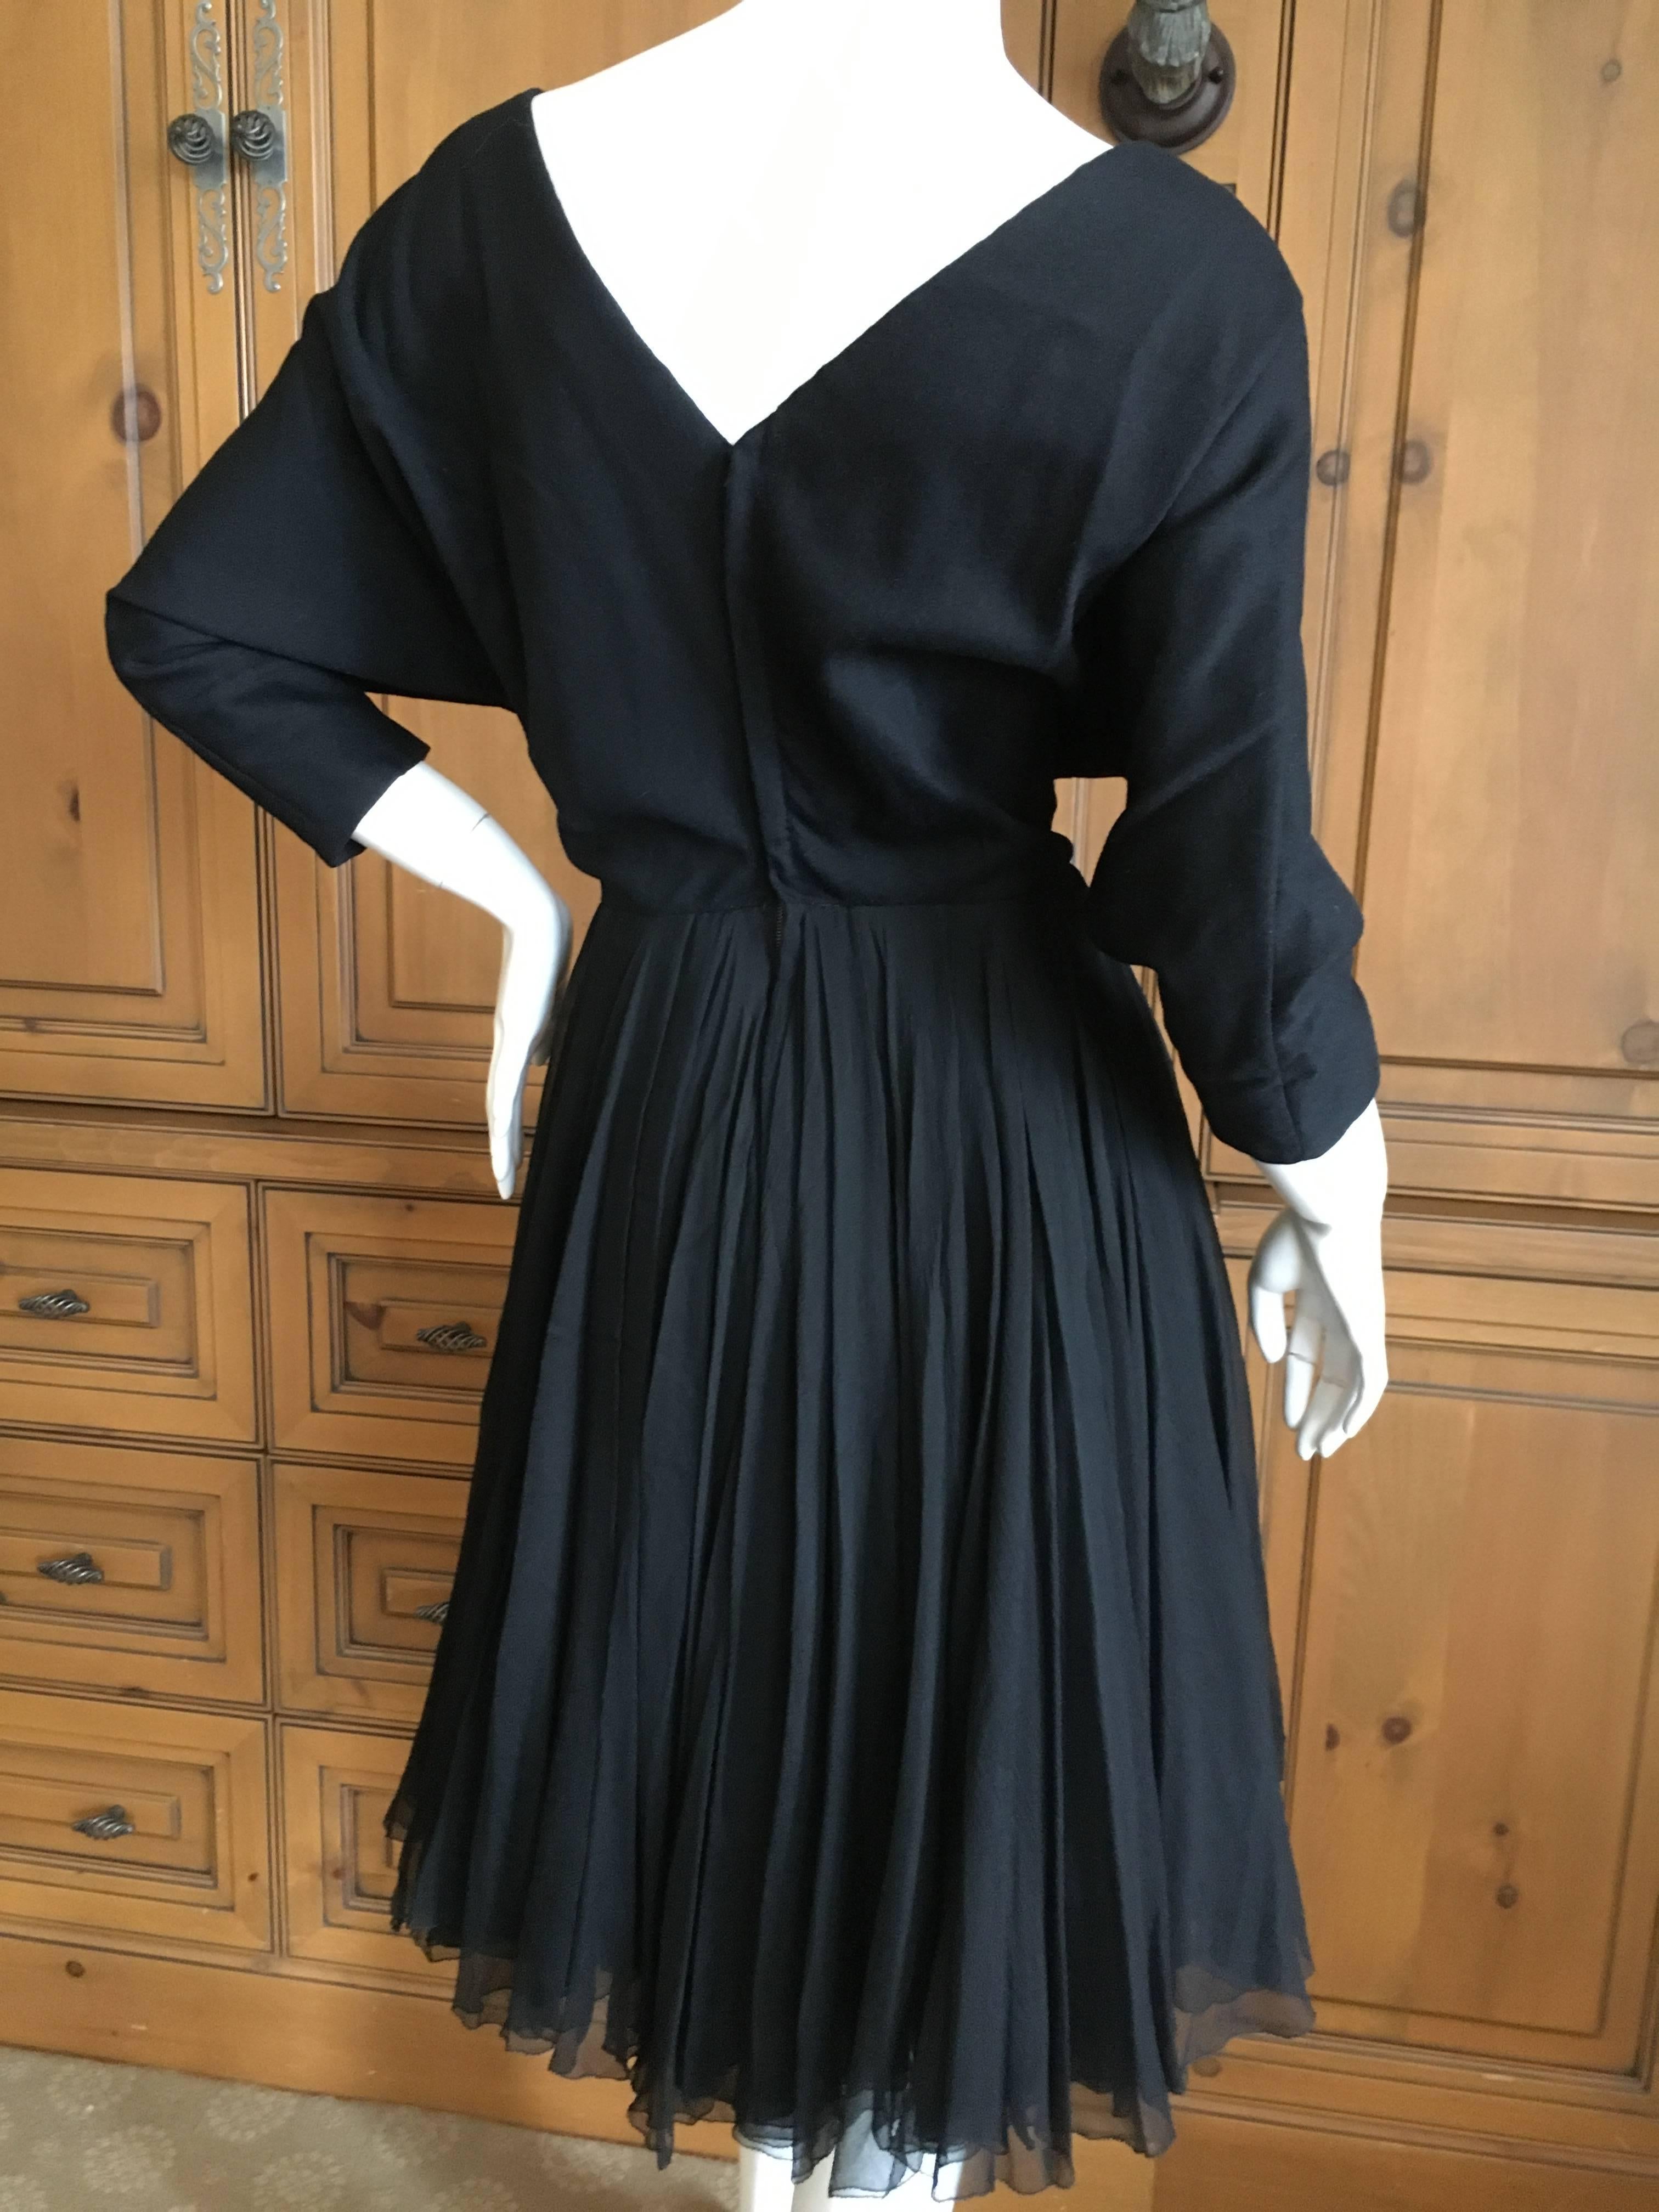 Galanos Originals Beverly Hills 1954 Cocktail Dress Silk Chiffon Skater Skirt In Excellent Condition For Sale In Cloverdale, CA